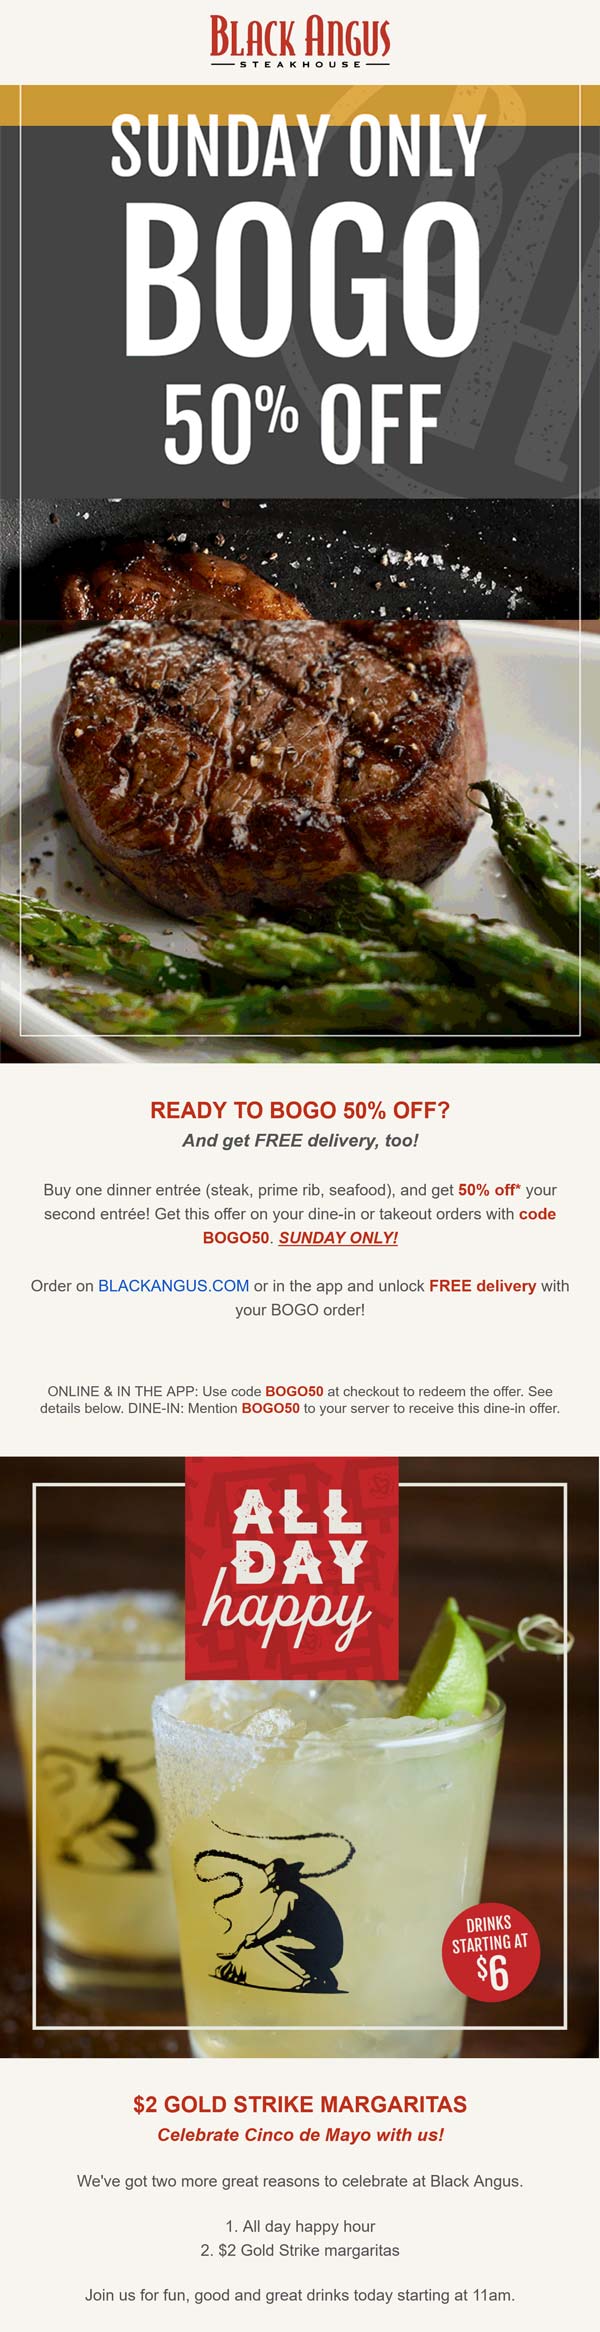 Black Angus restaurants Coupon  Second entree 50% off today at Black Angus steakhouse #blackangus 